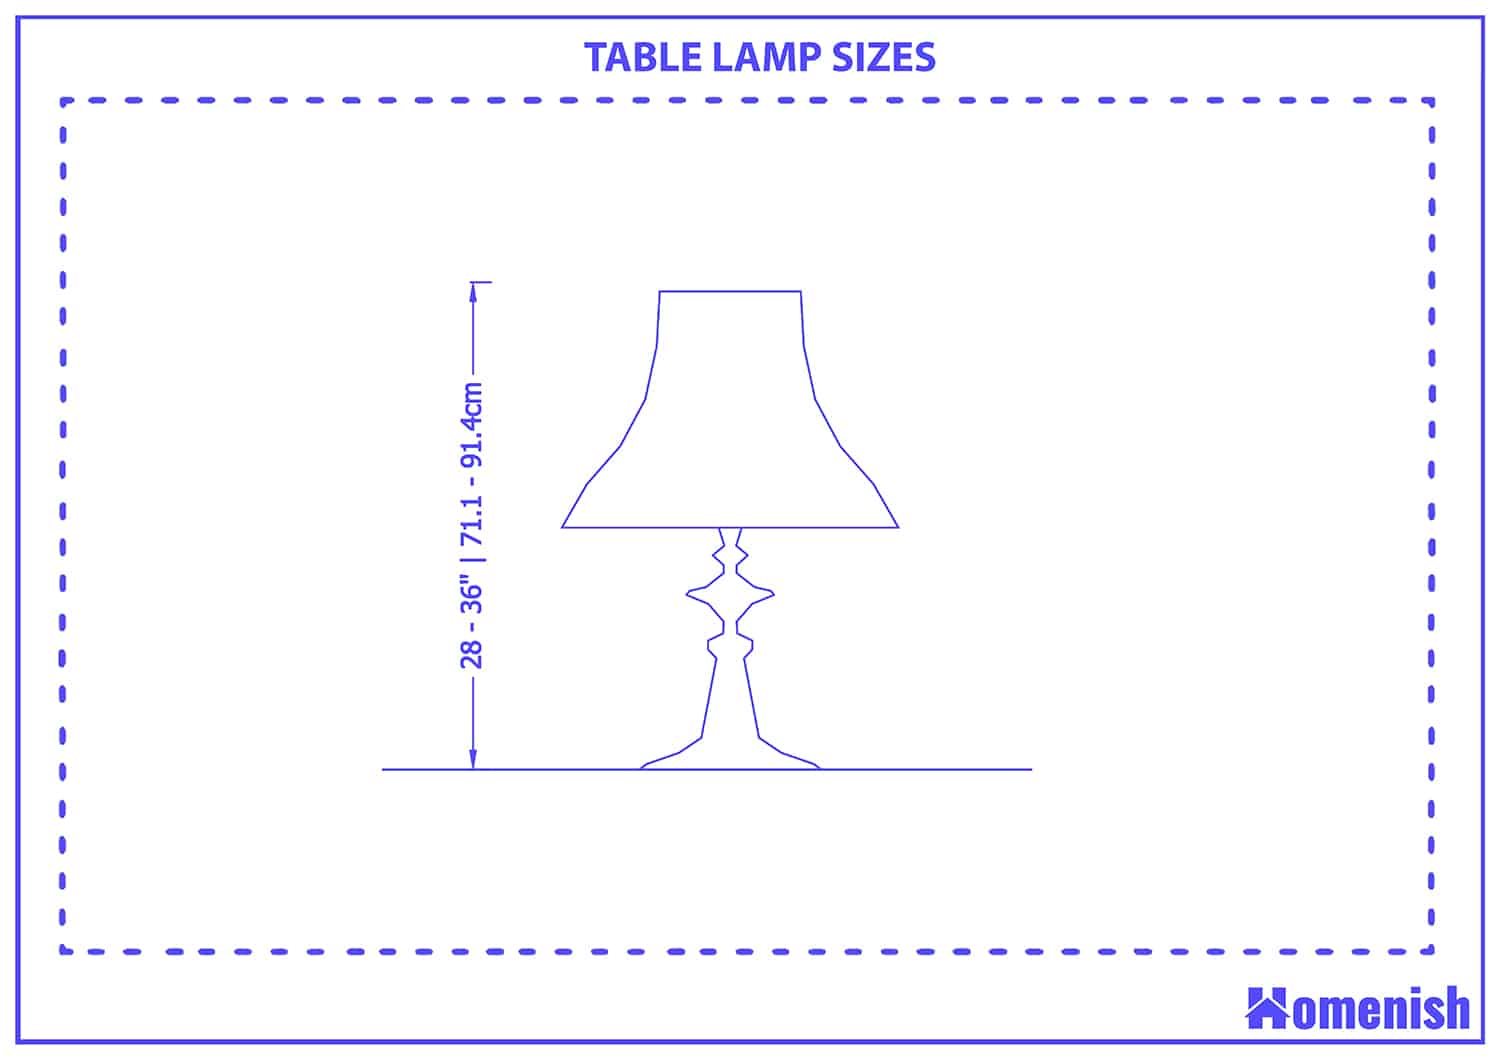 Standard Table lamp Sizes